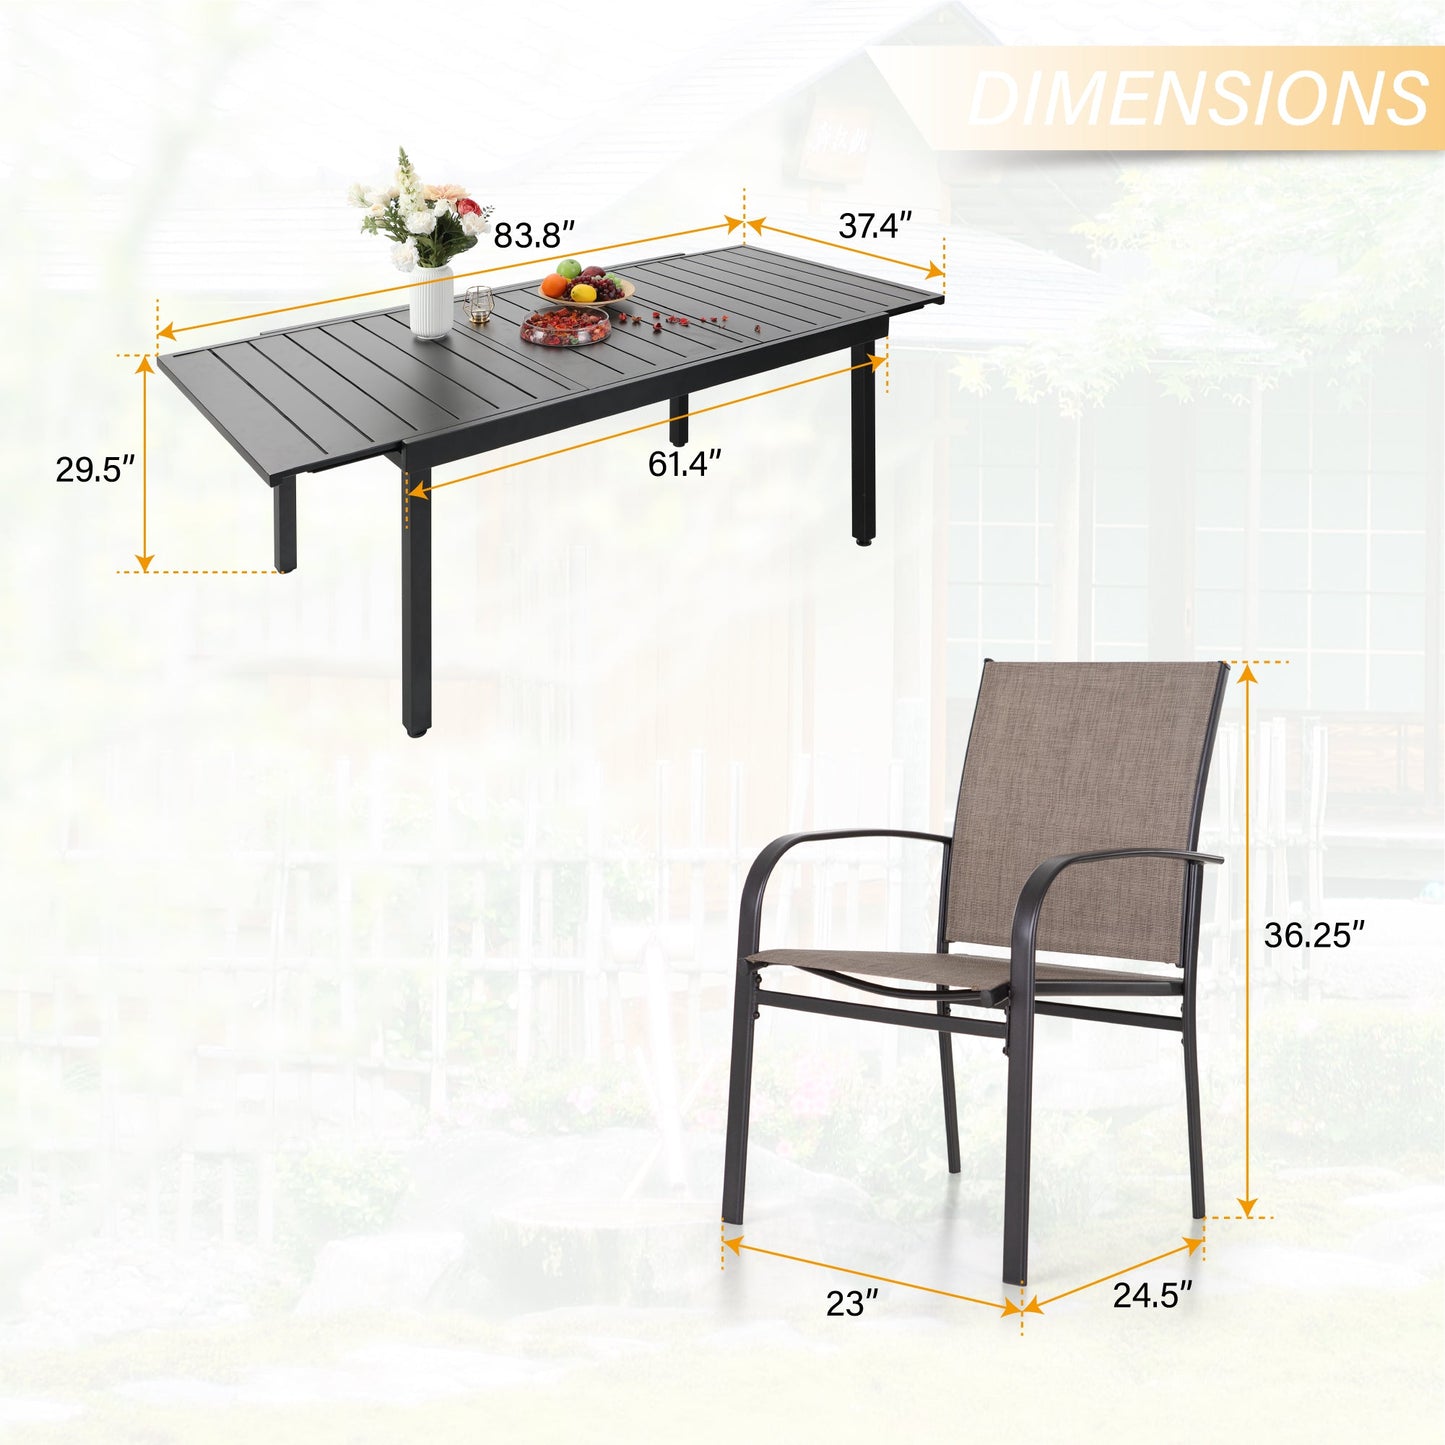 Sophia & William 7 Piece Patio Metal Dining Set Expandable Patio Dining Table and 6 Brown Textilene Chairs